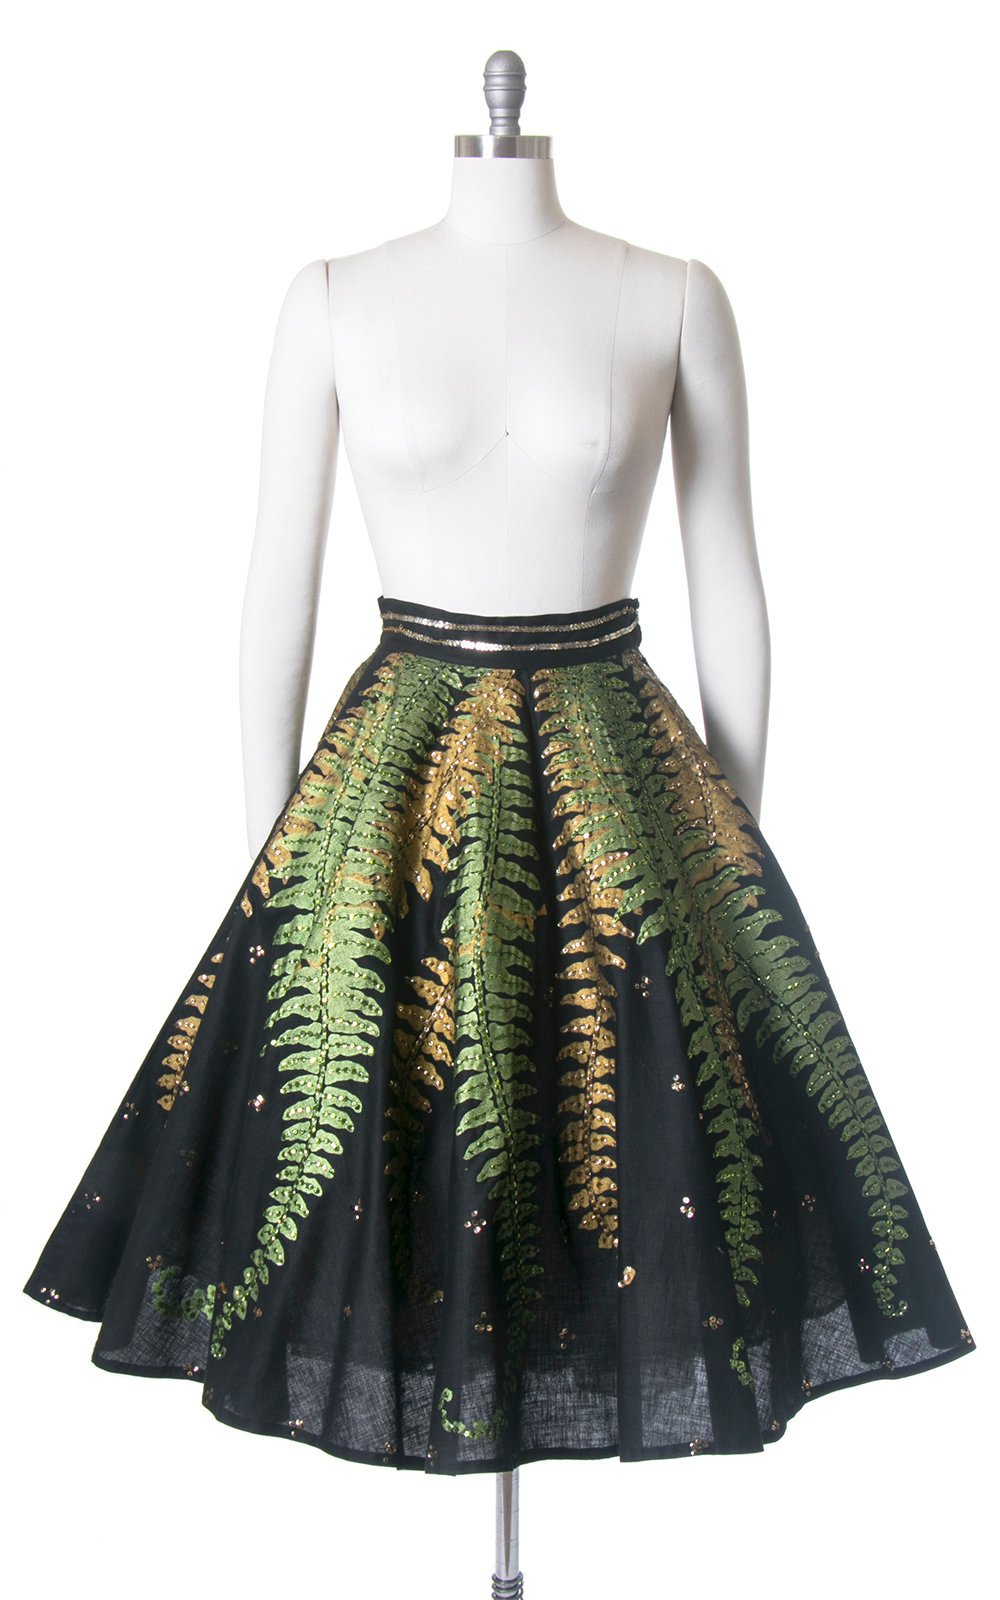 RARE Vintage 1950s Circle Skirt | 50s Mexican Sequin Fern Novelty Print Black Cotton Hand Painted Souvenir Skirt (small)